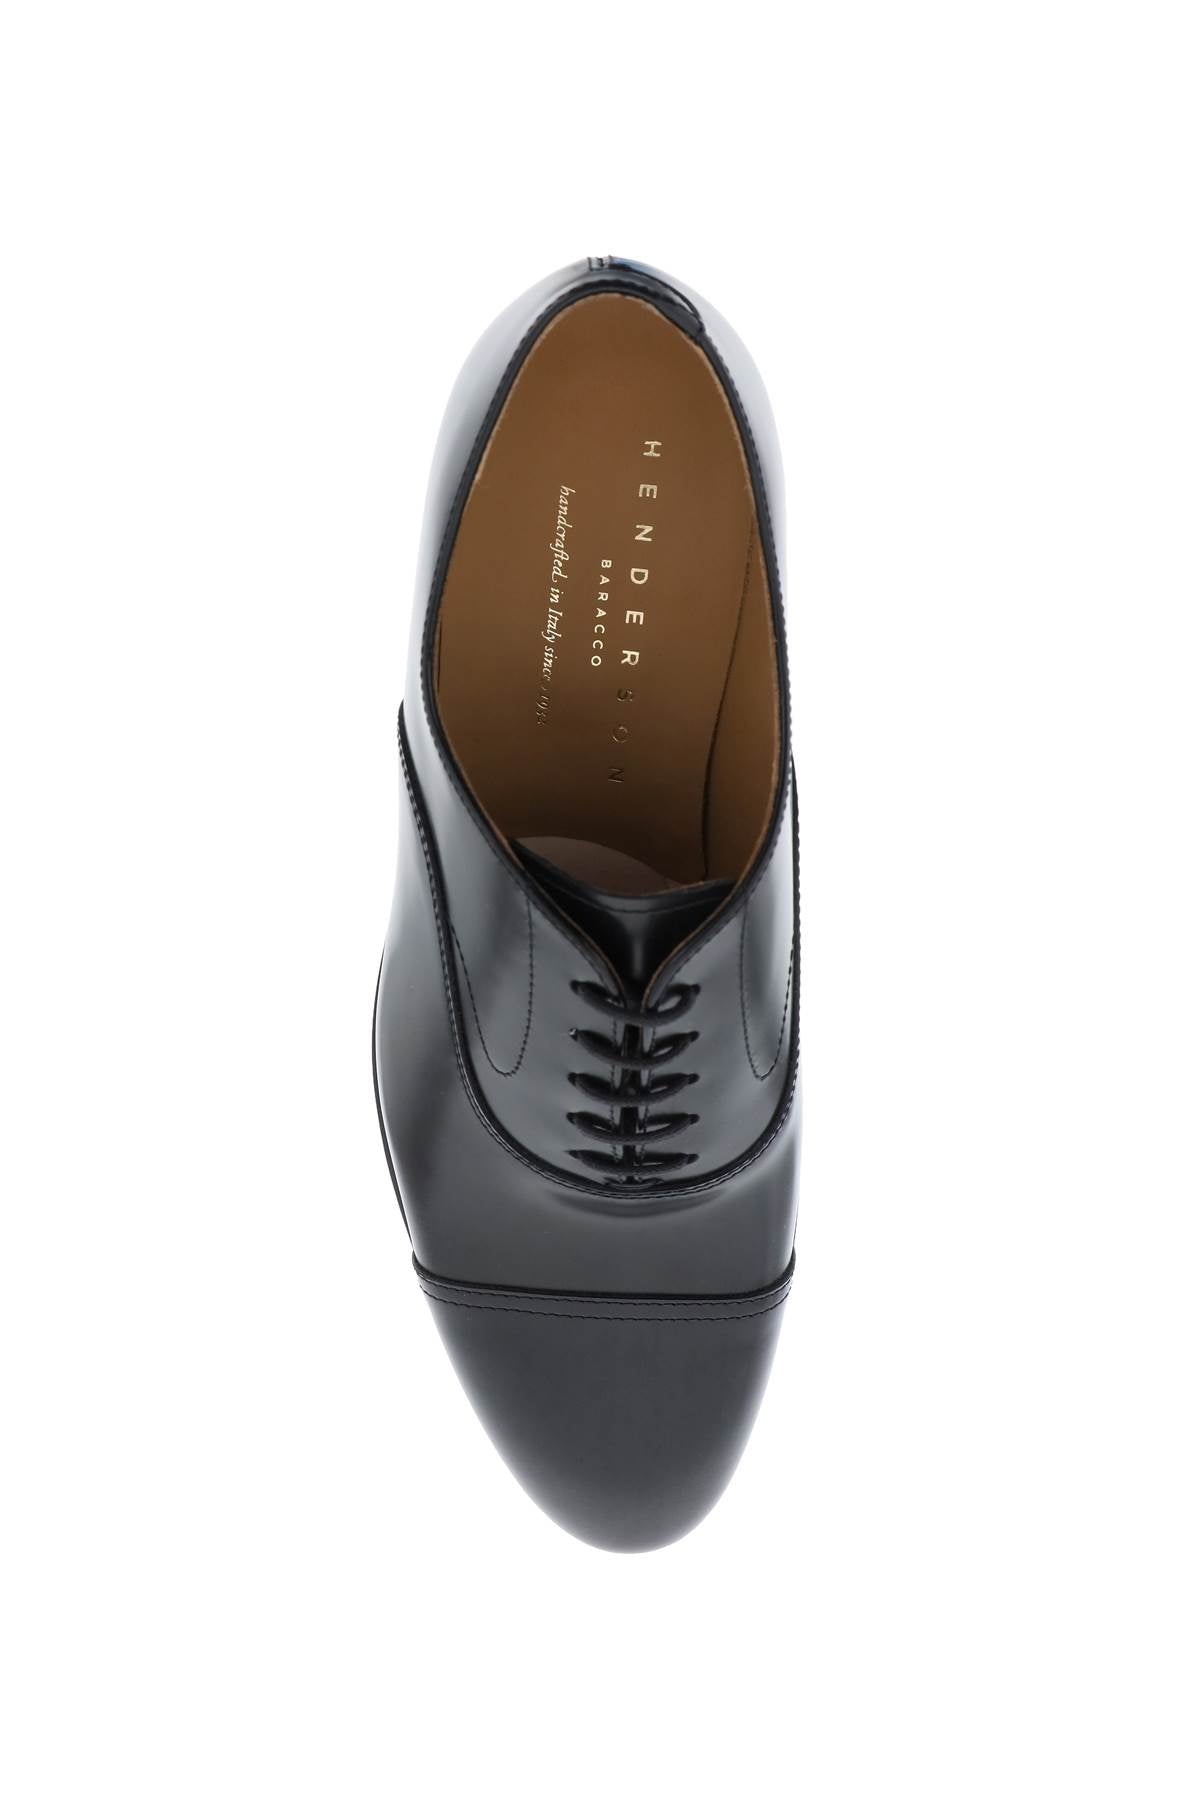 HENDERSON Henderson oxford lace-up shoes